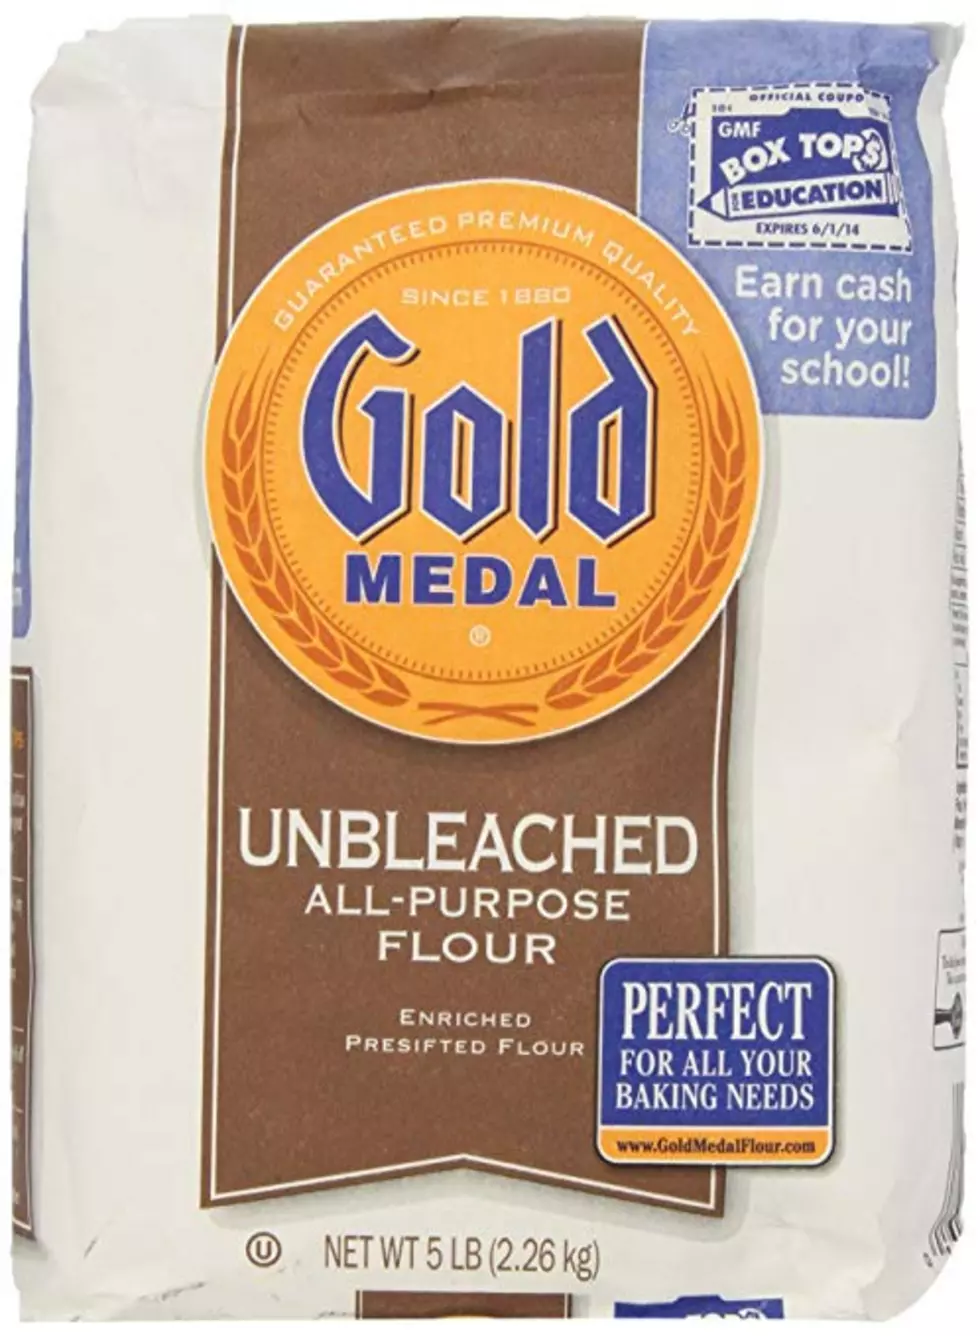 General Mills Issues Nationwide Gold Medal Flour Recall